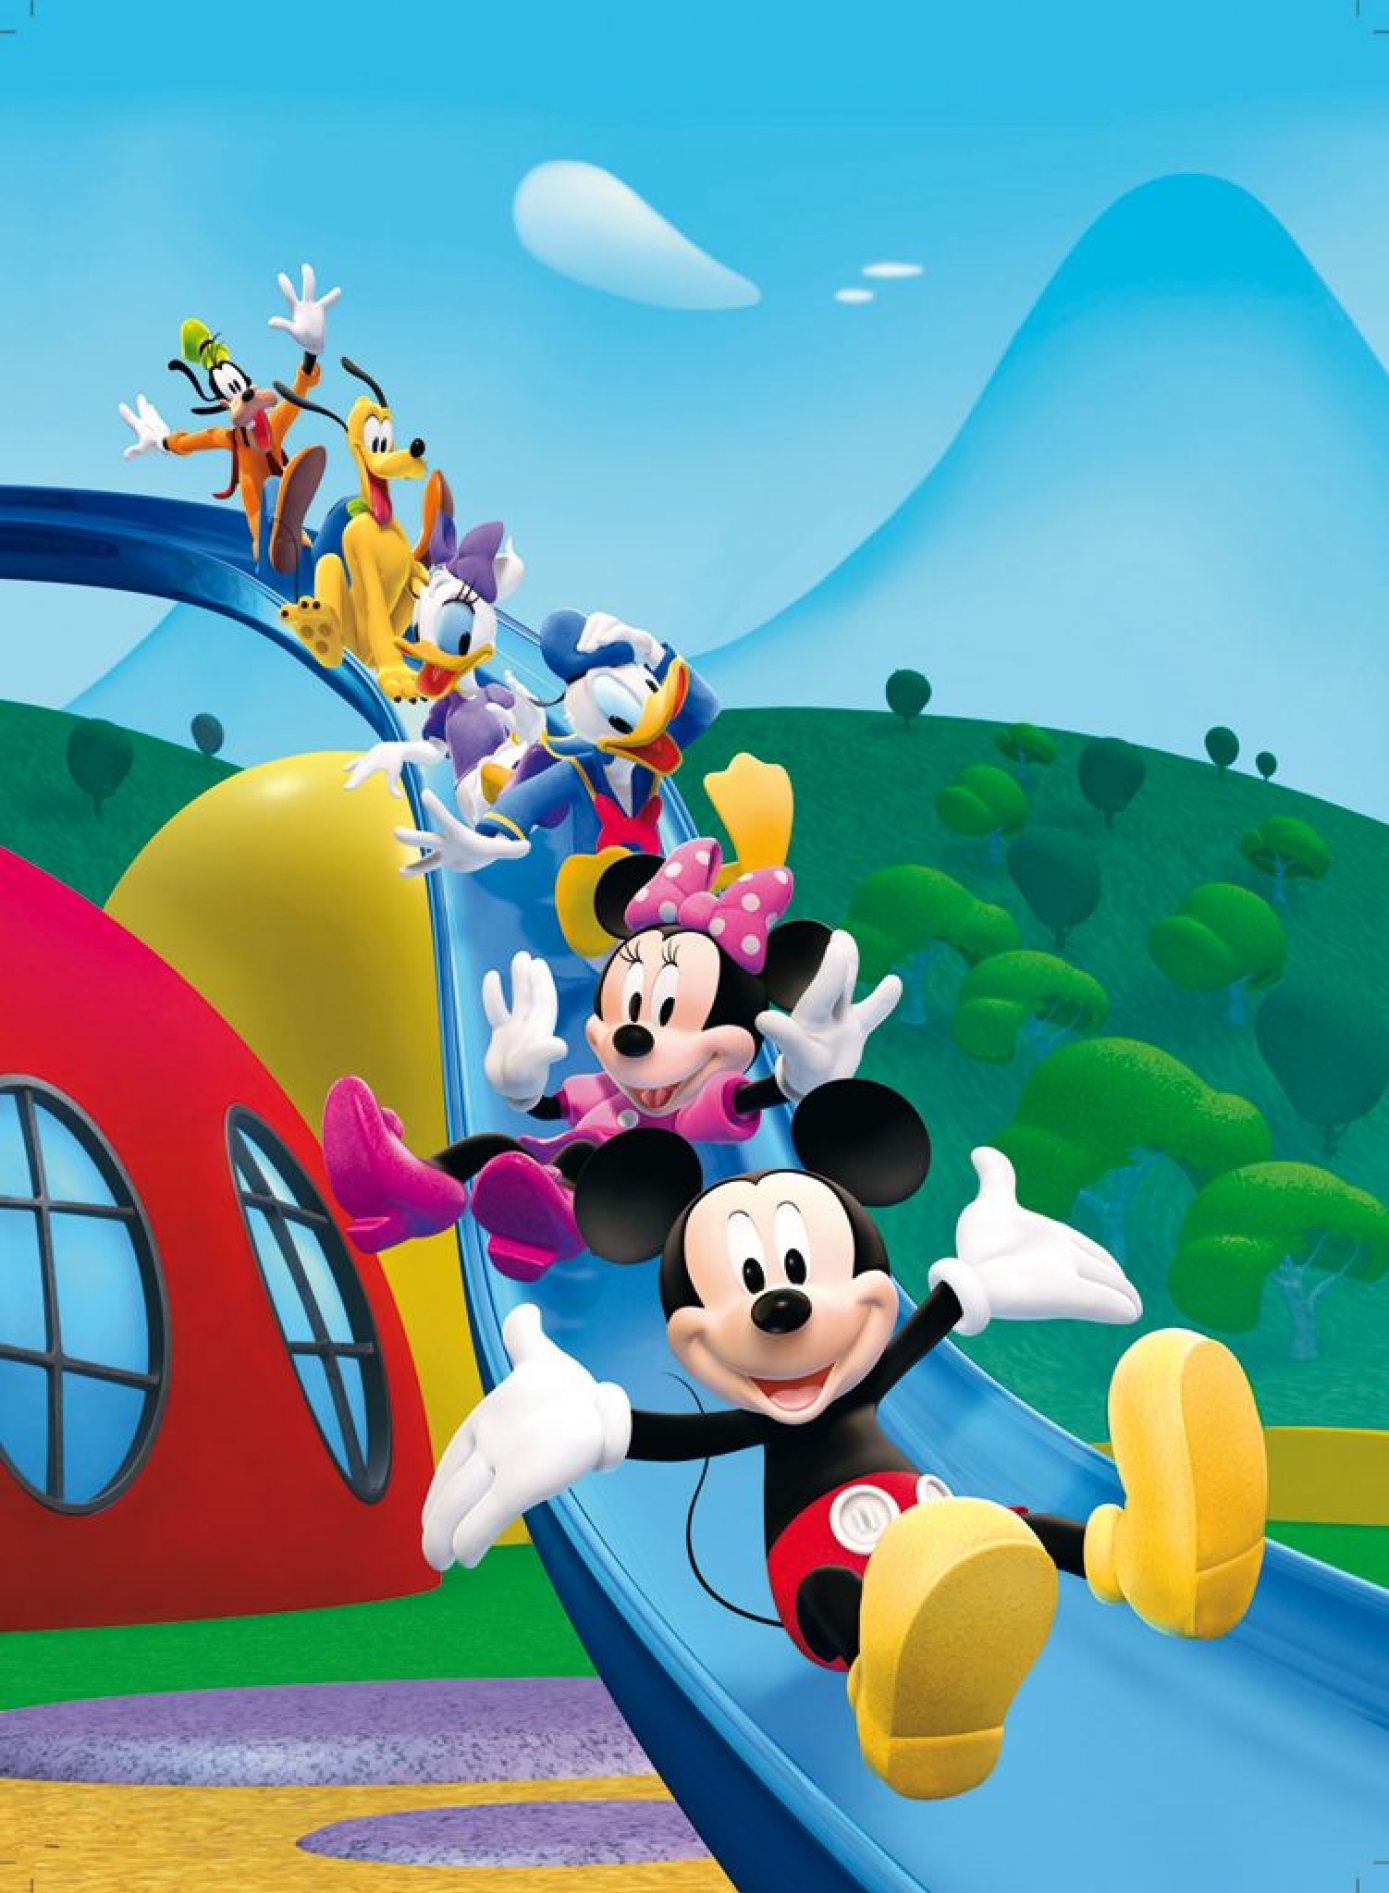 Mickey Mouse Backgrounds